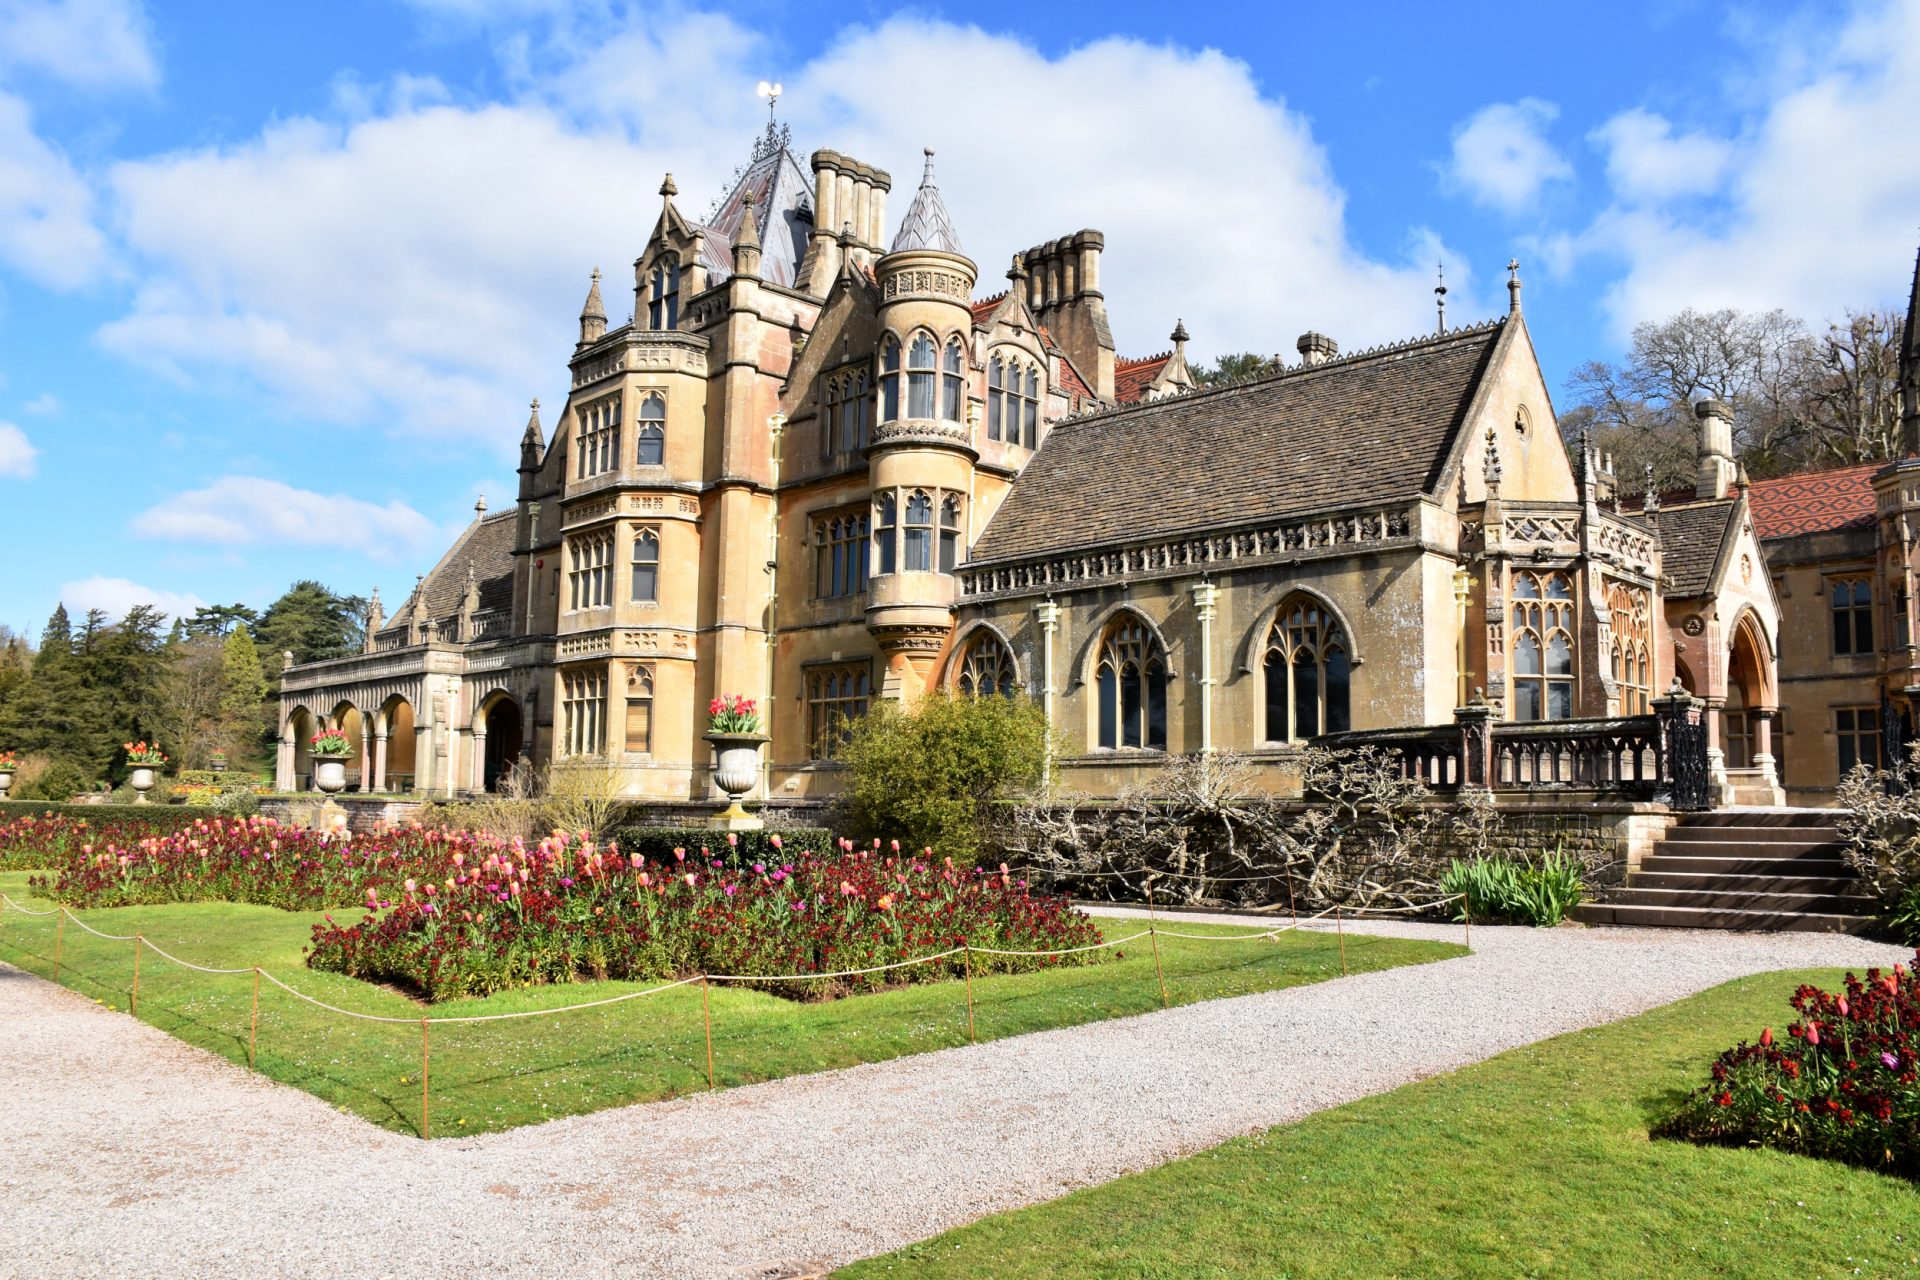 The house at Tyntesfield, Somersets